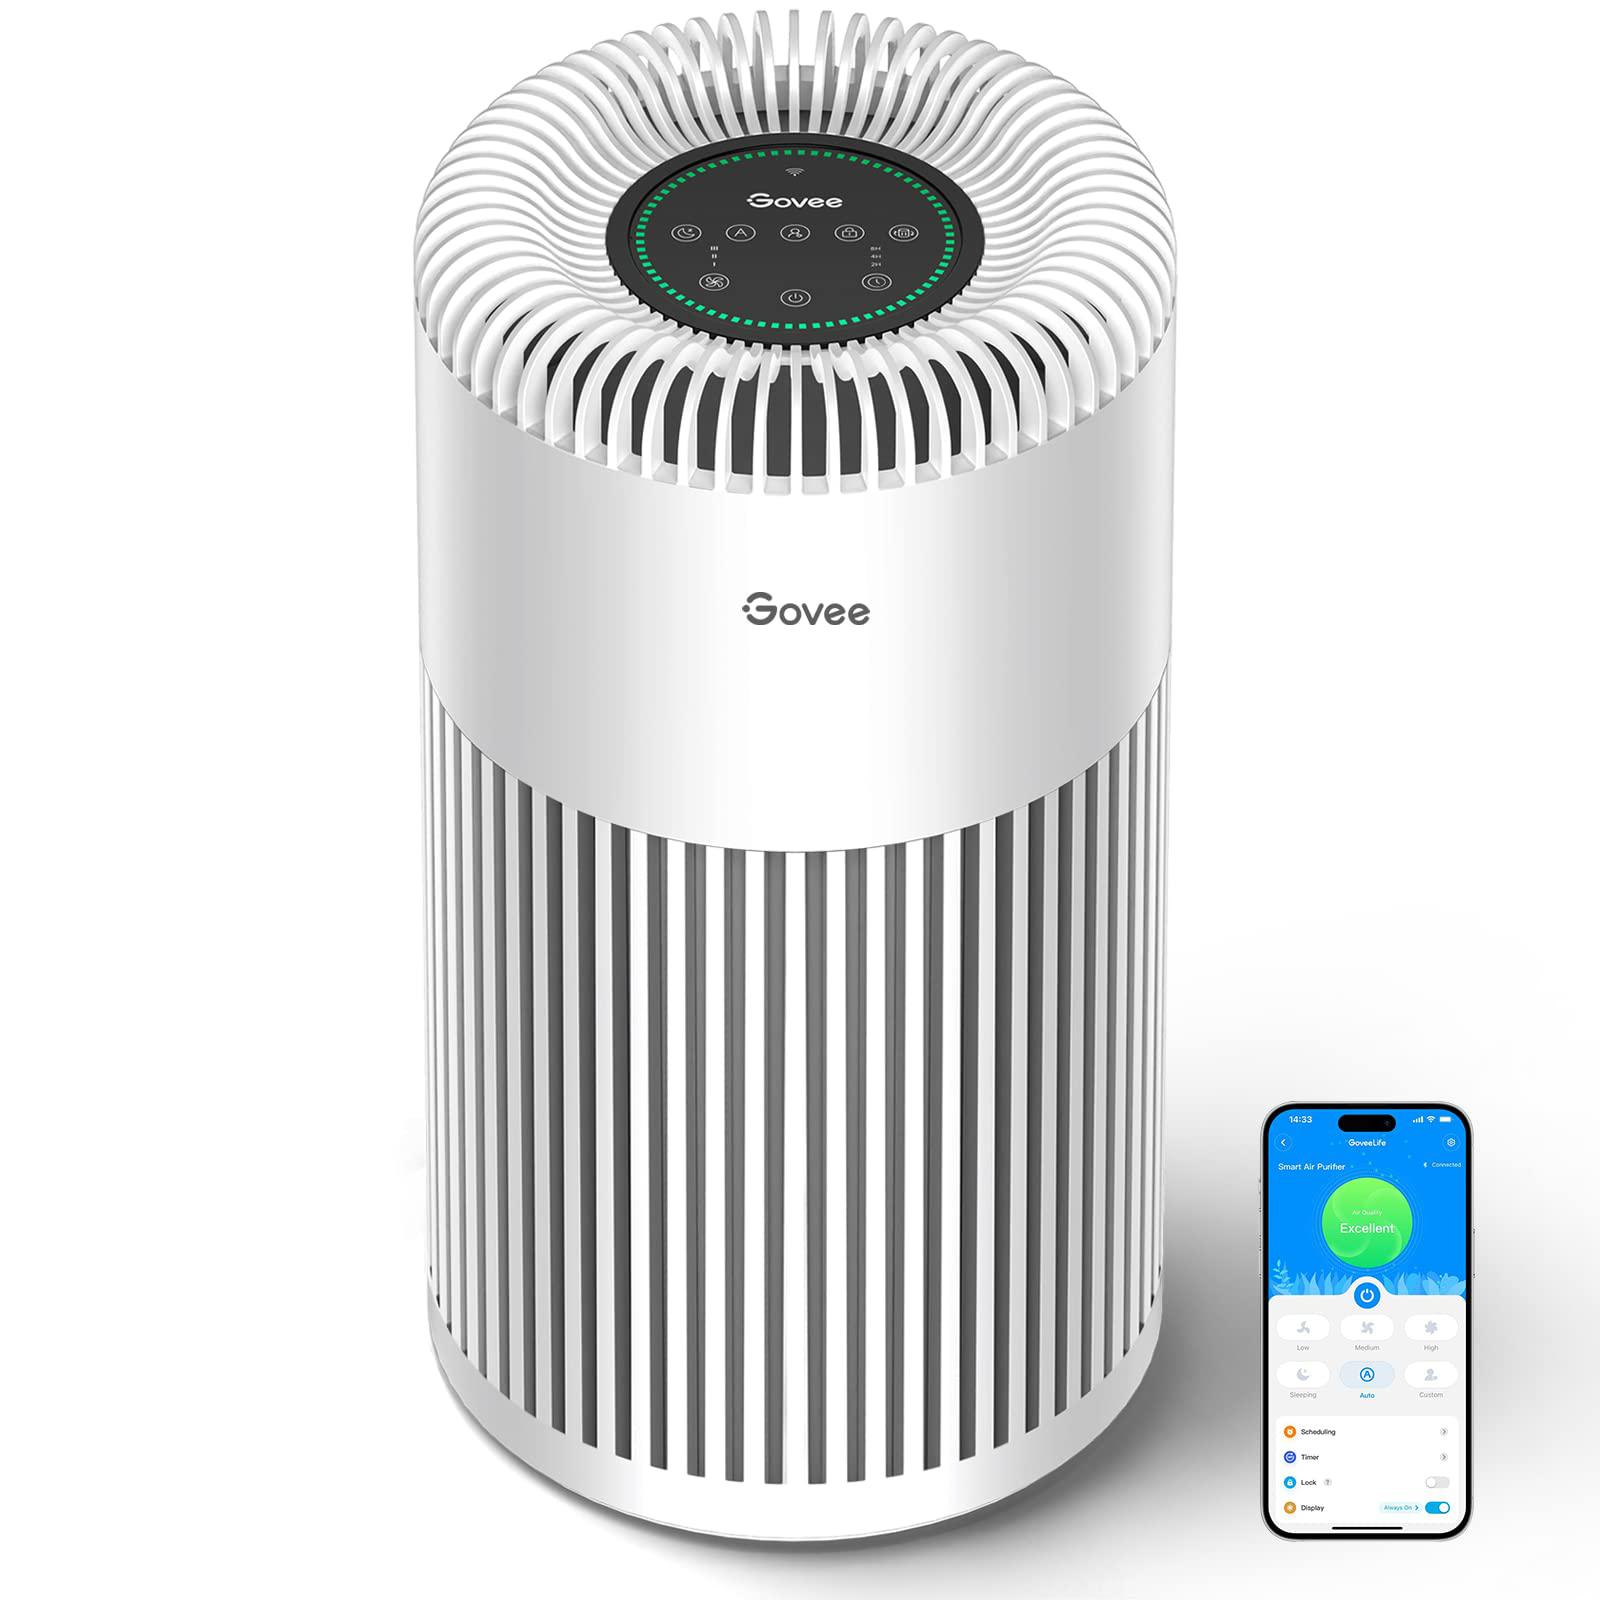 govee air purifiers for home large room up to 1837 sq.ft, wifi smart air purifier with pm2.5 monitor for wildfire, h13 true h